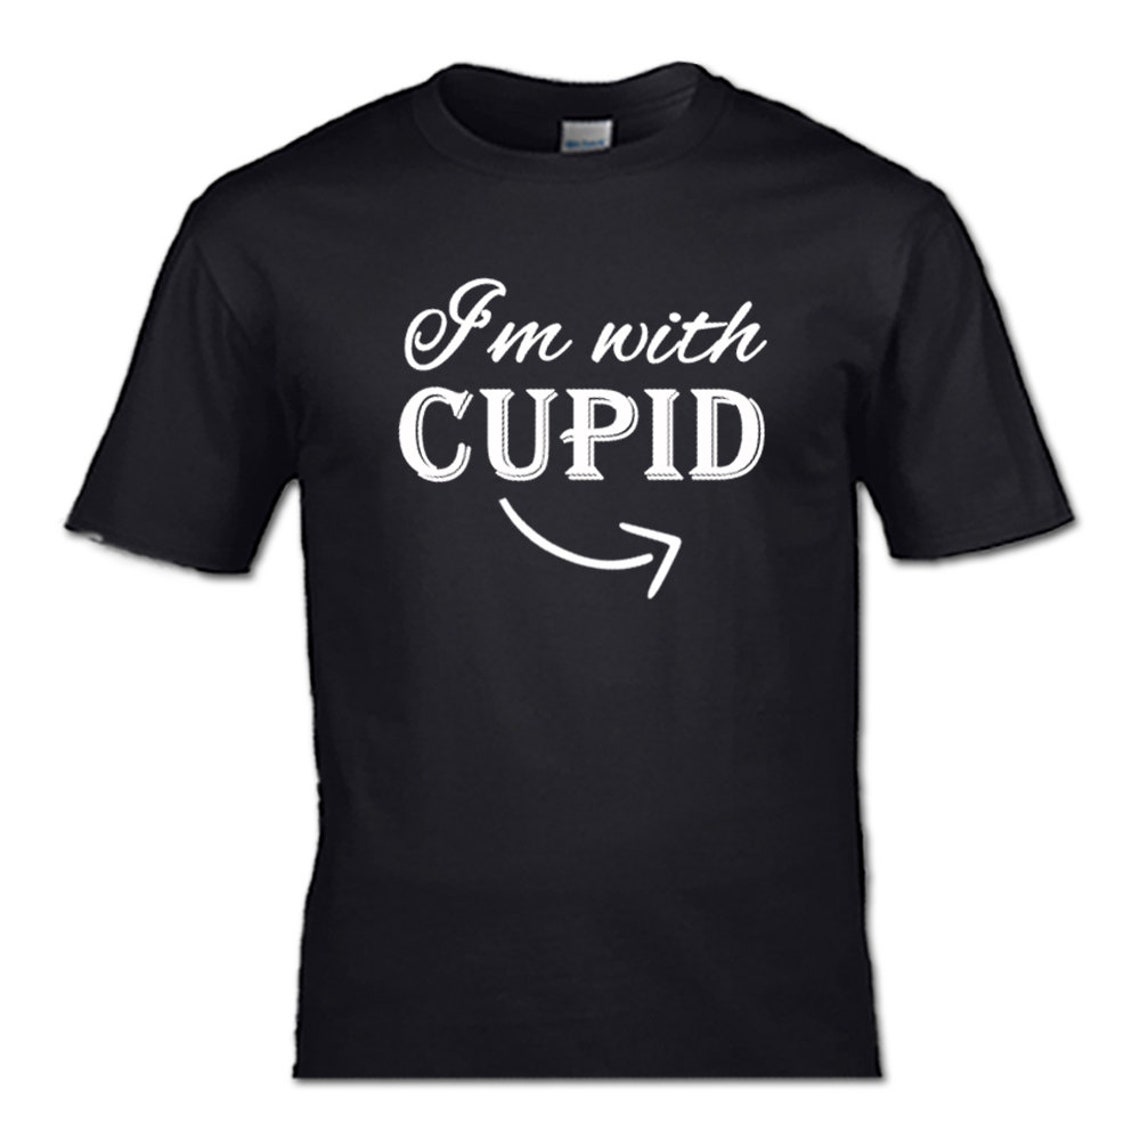 I'm With Cupid and Cupid T-shirt Set His and Hers Best | Etsy